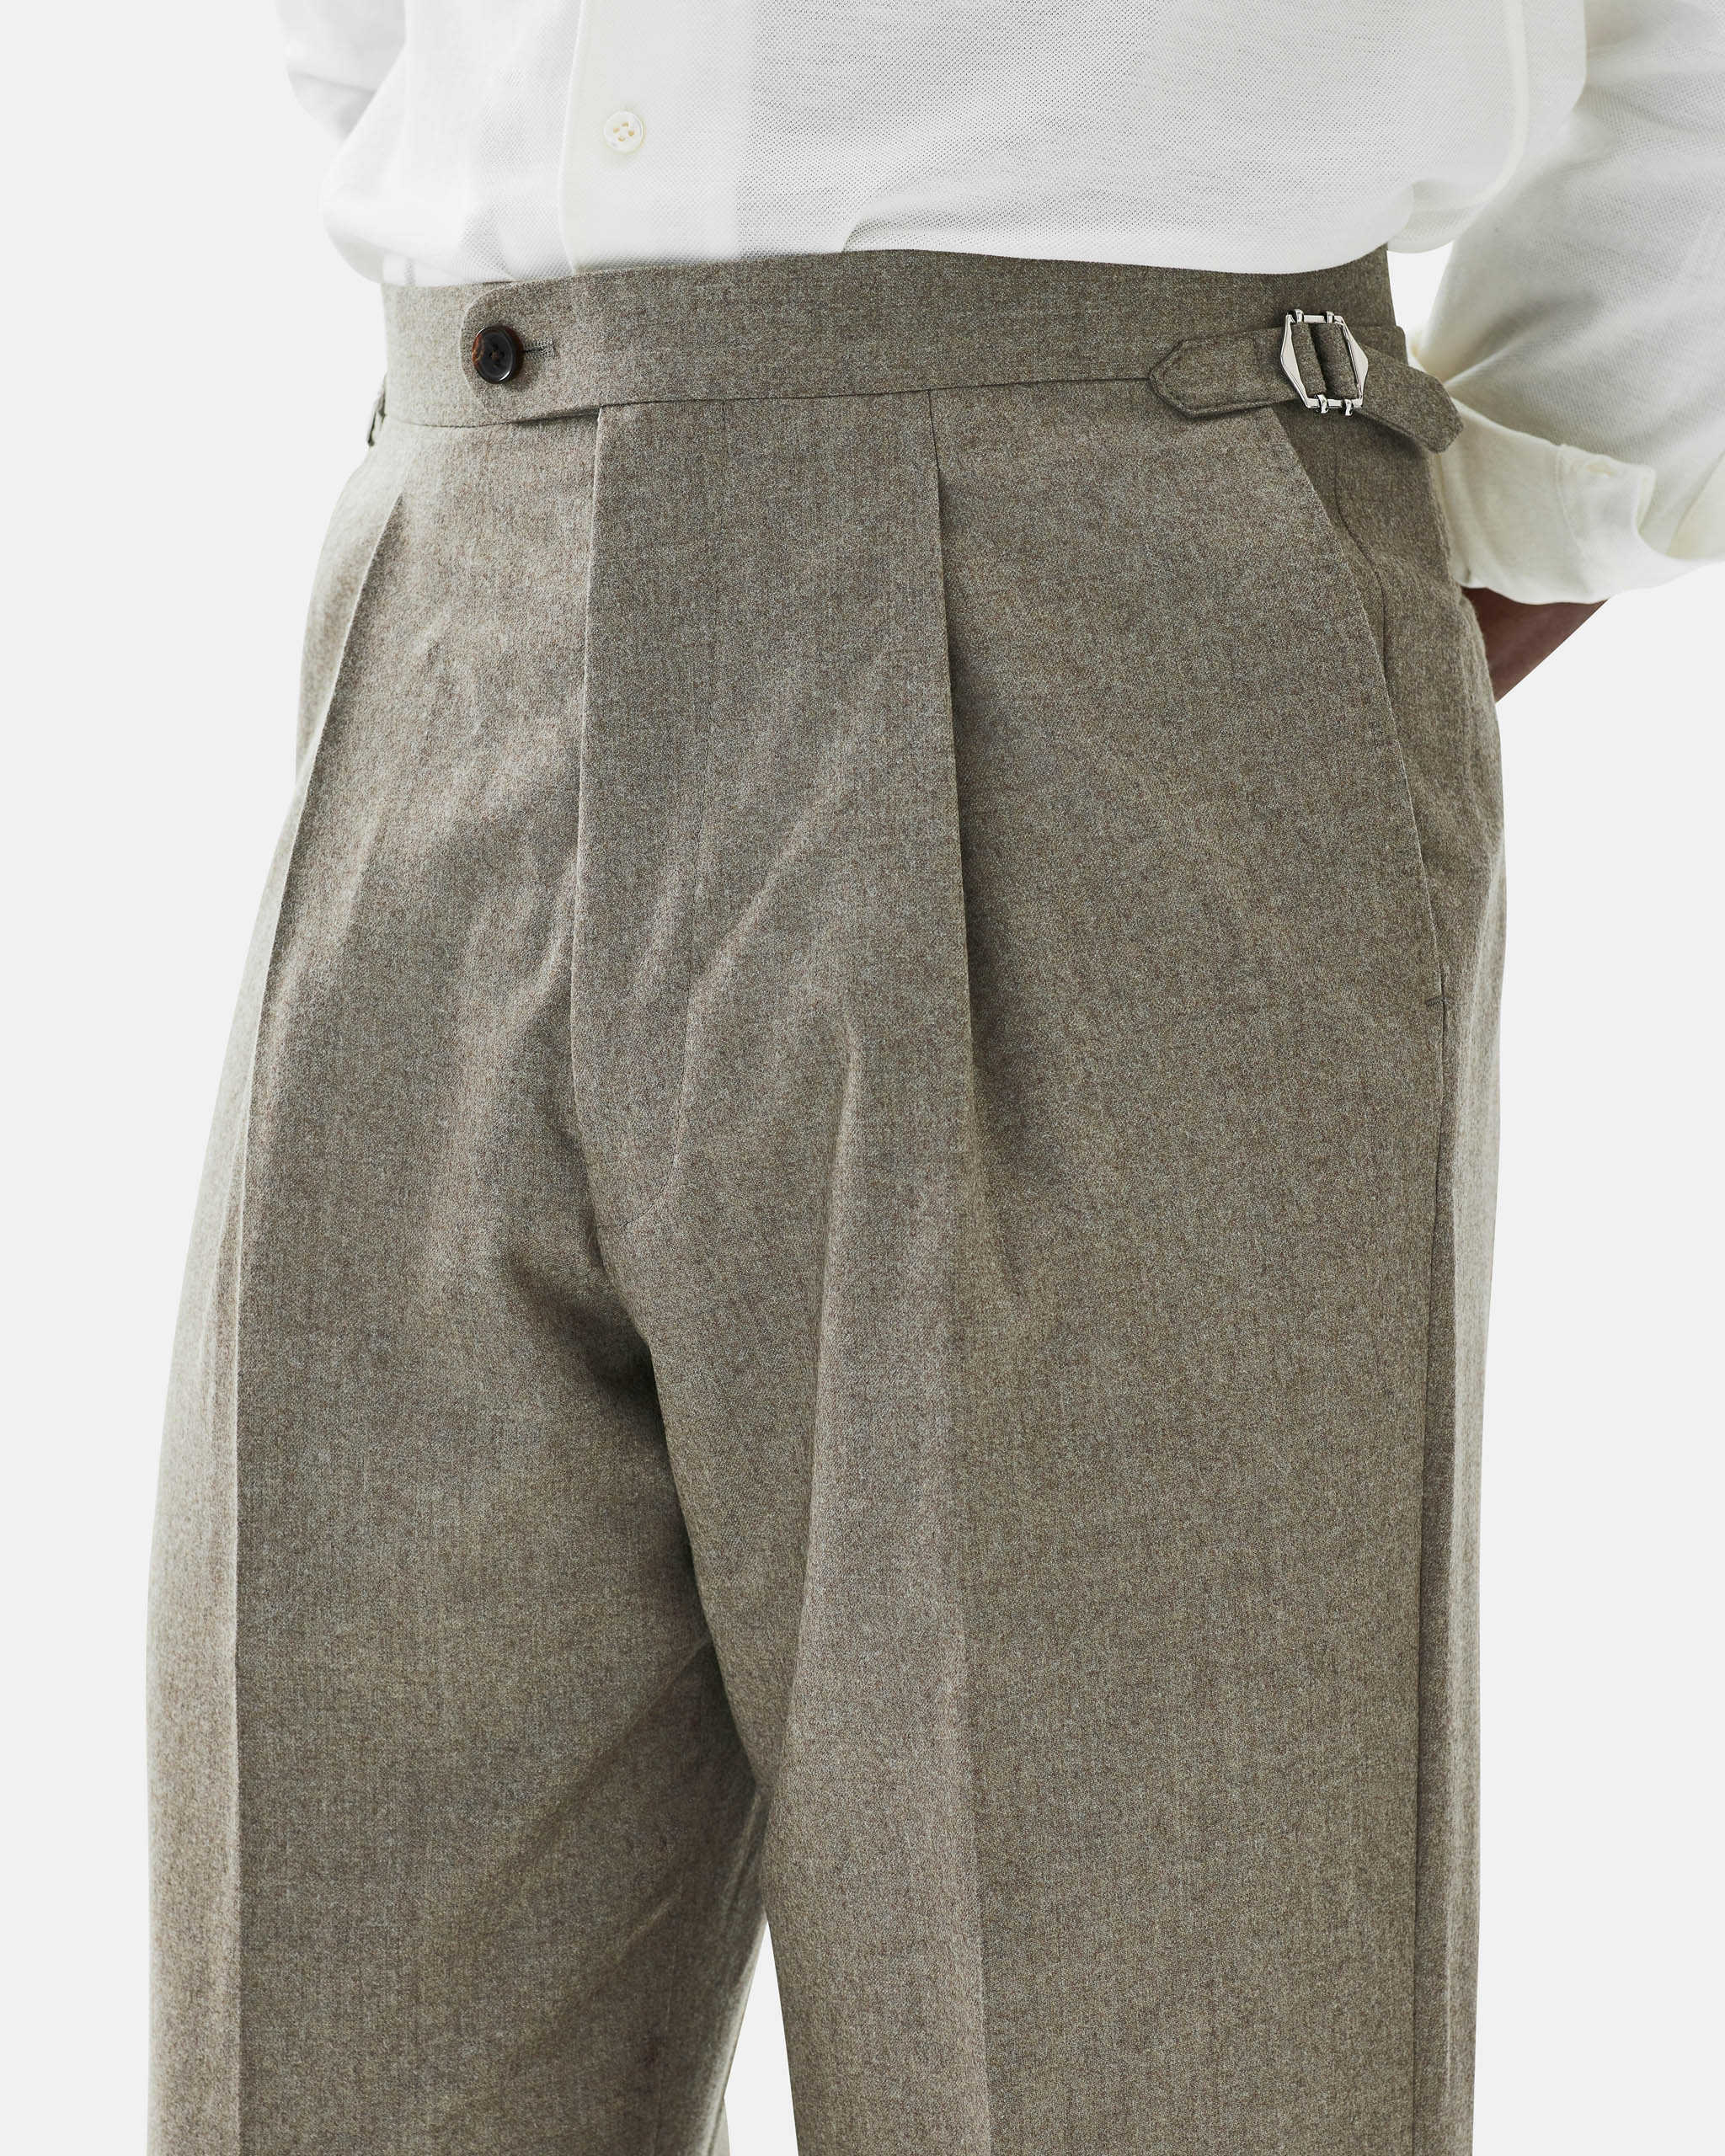 Trousers flannel taupe image 3